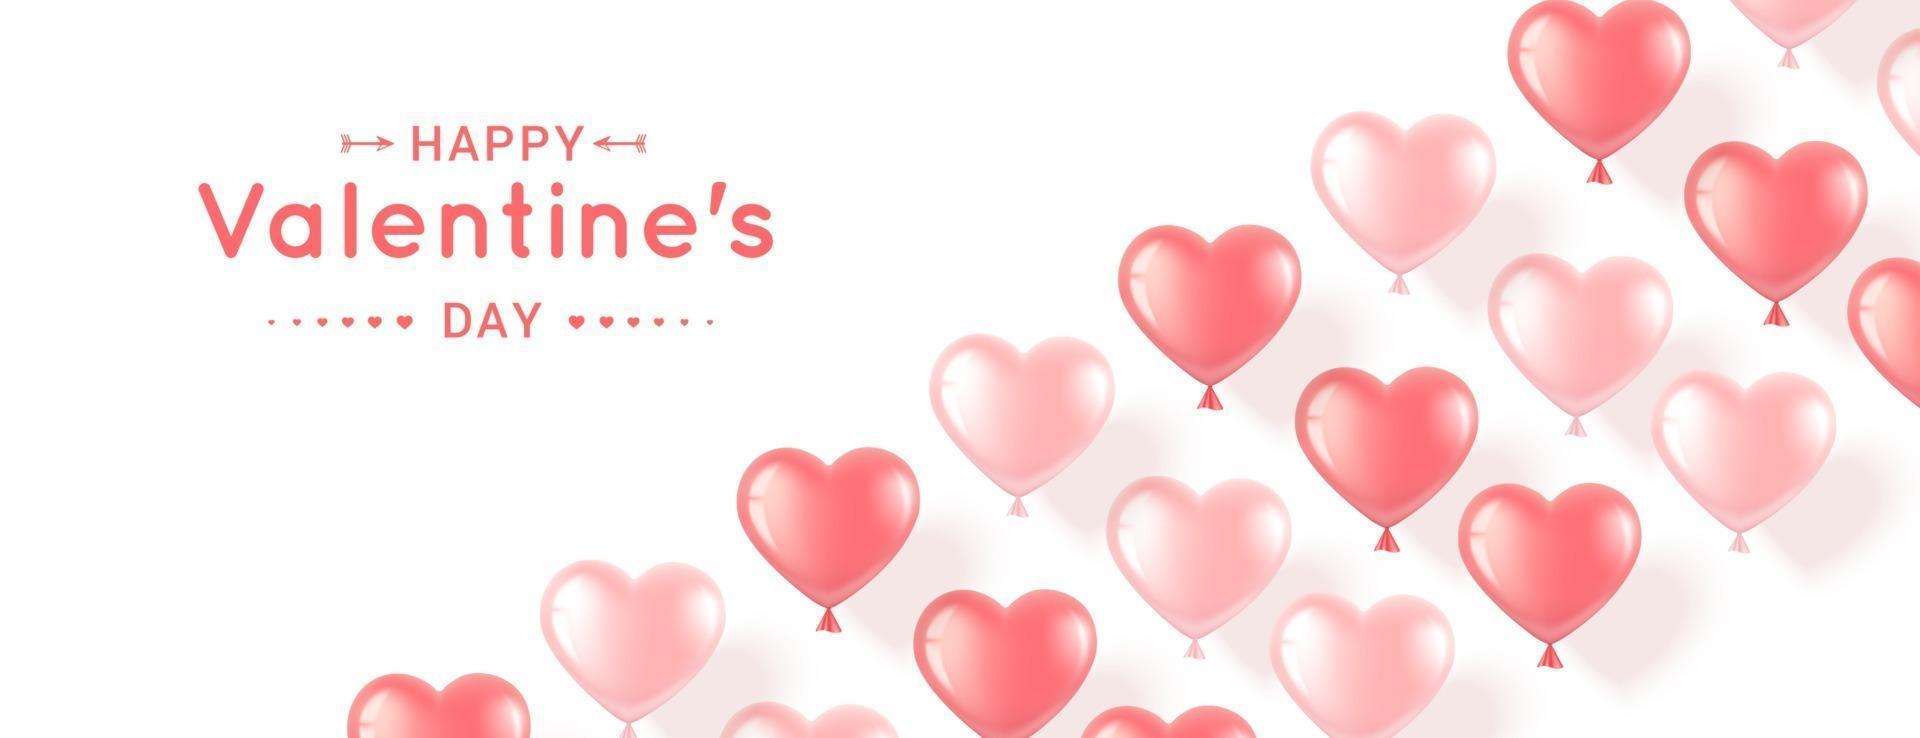 Banner with pink hearts for Valentine's Day vector